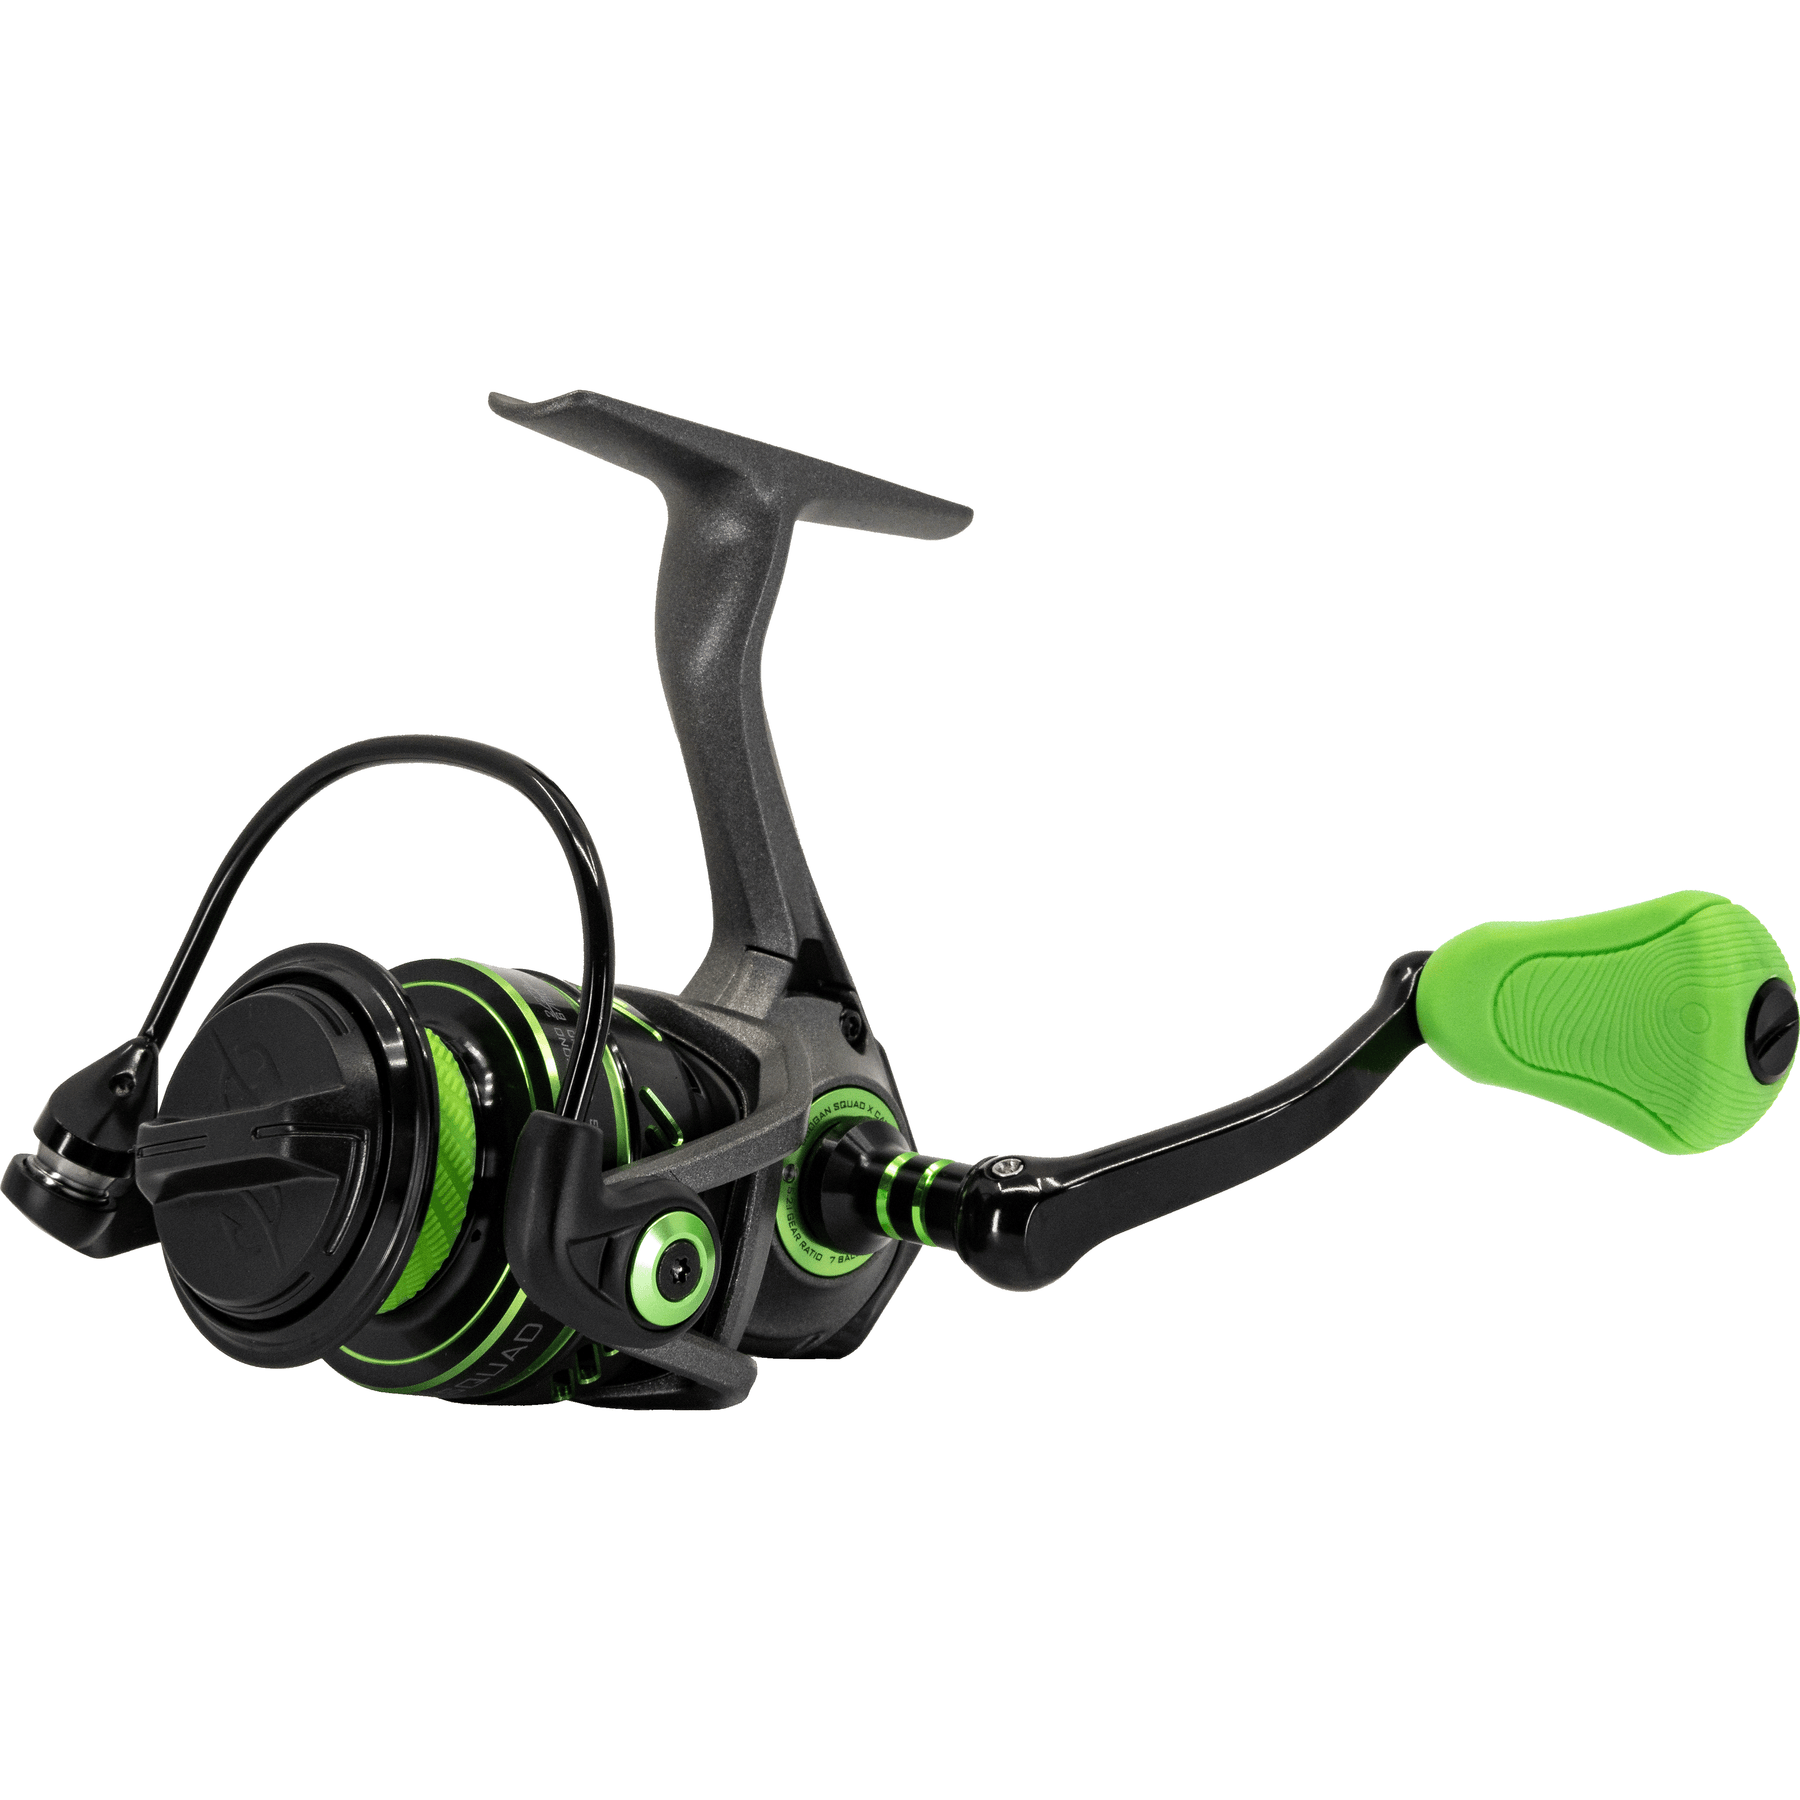 Help Design the High Altitude Backcountry 1000 Spinning Reel